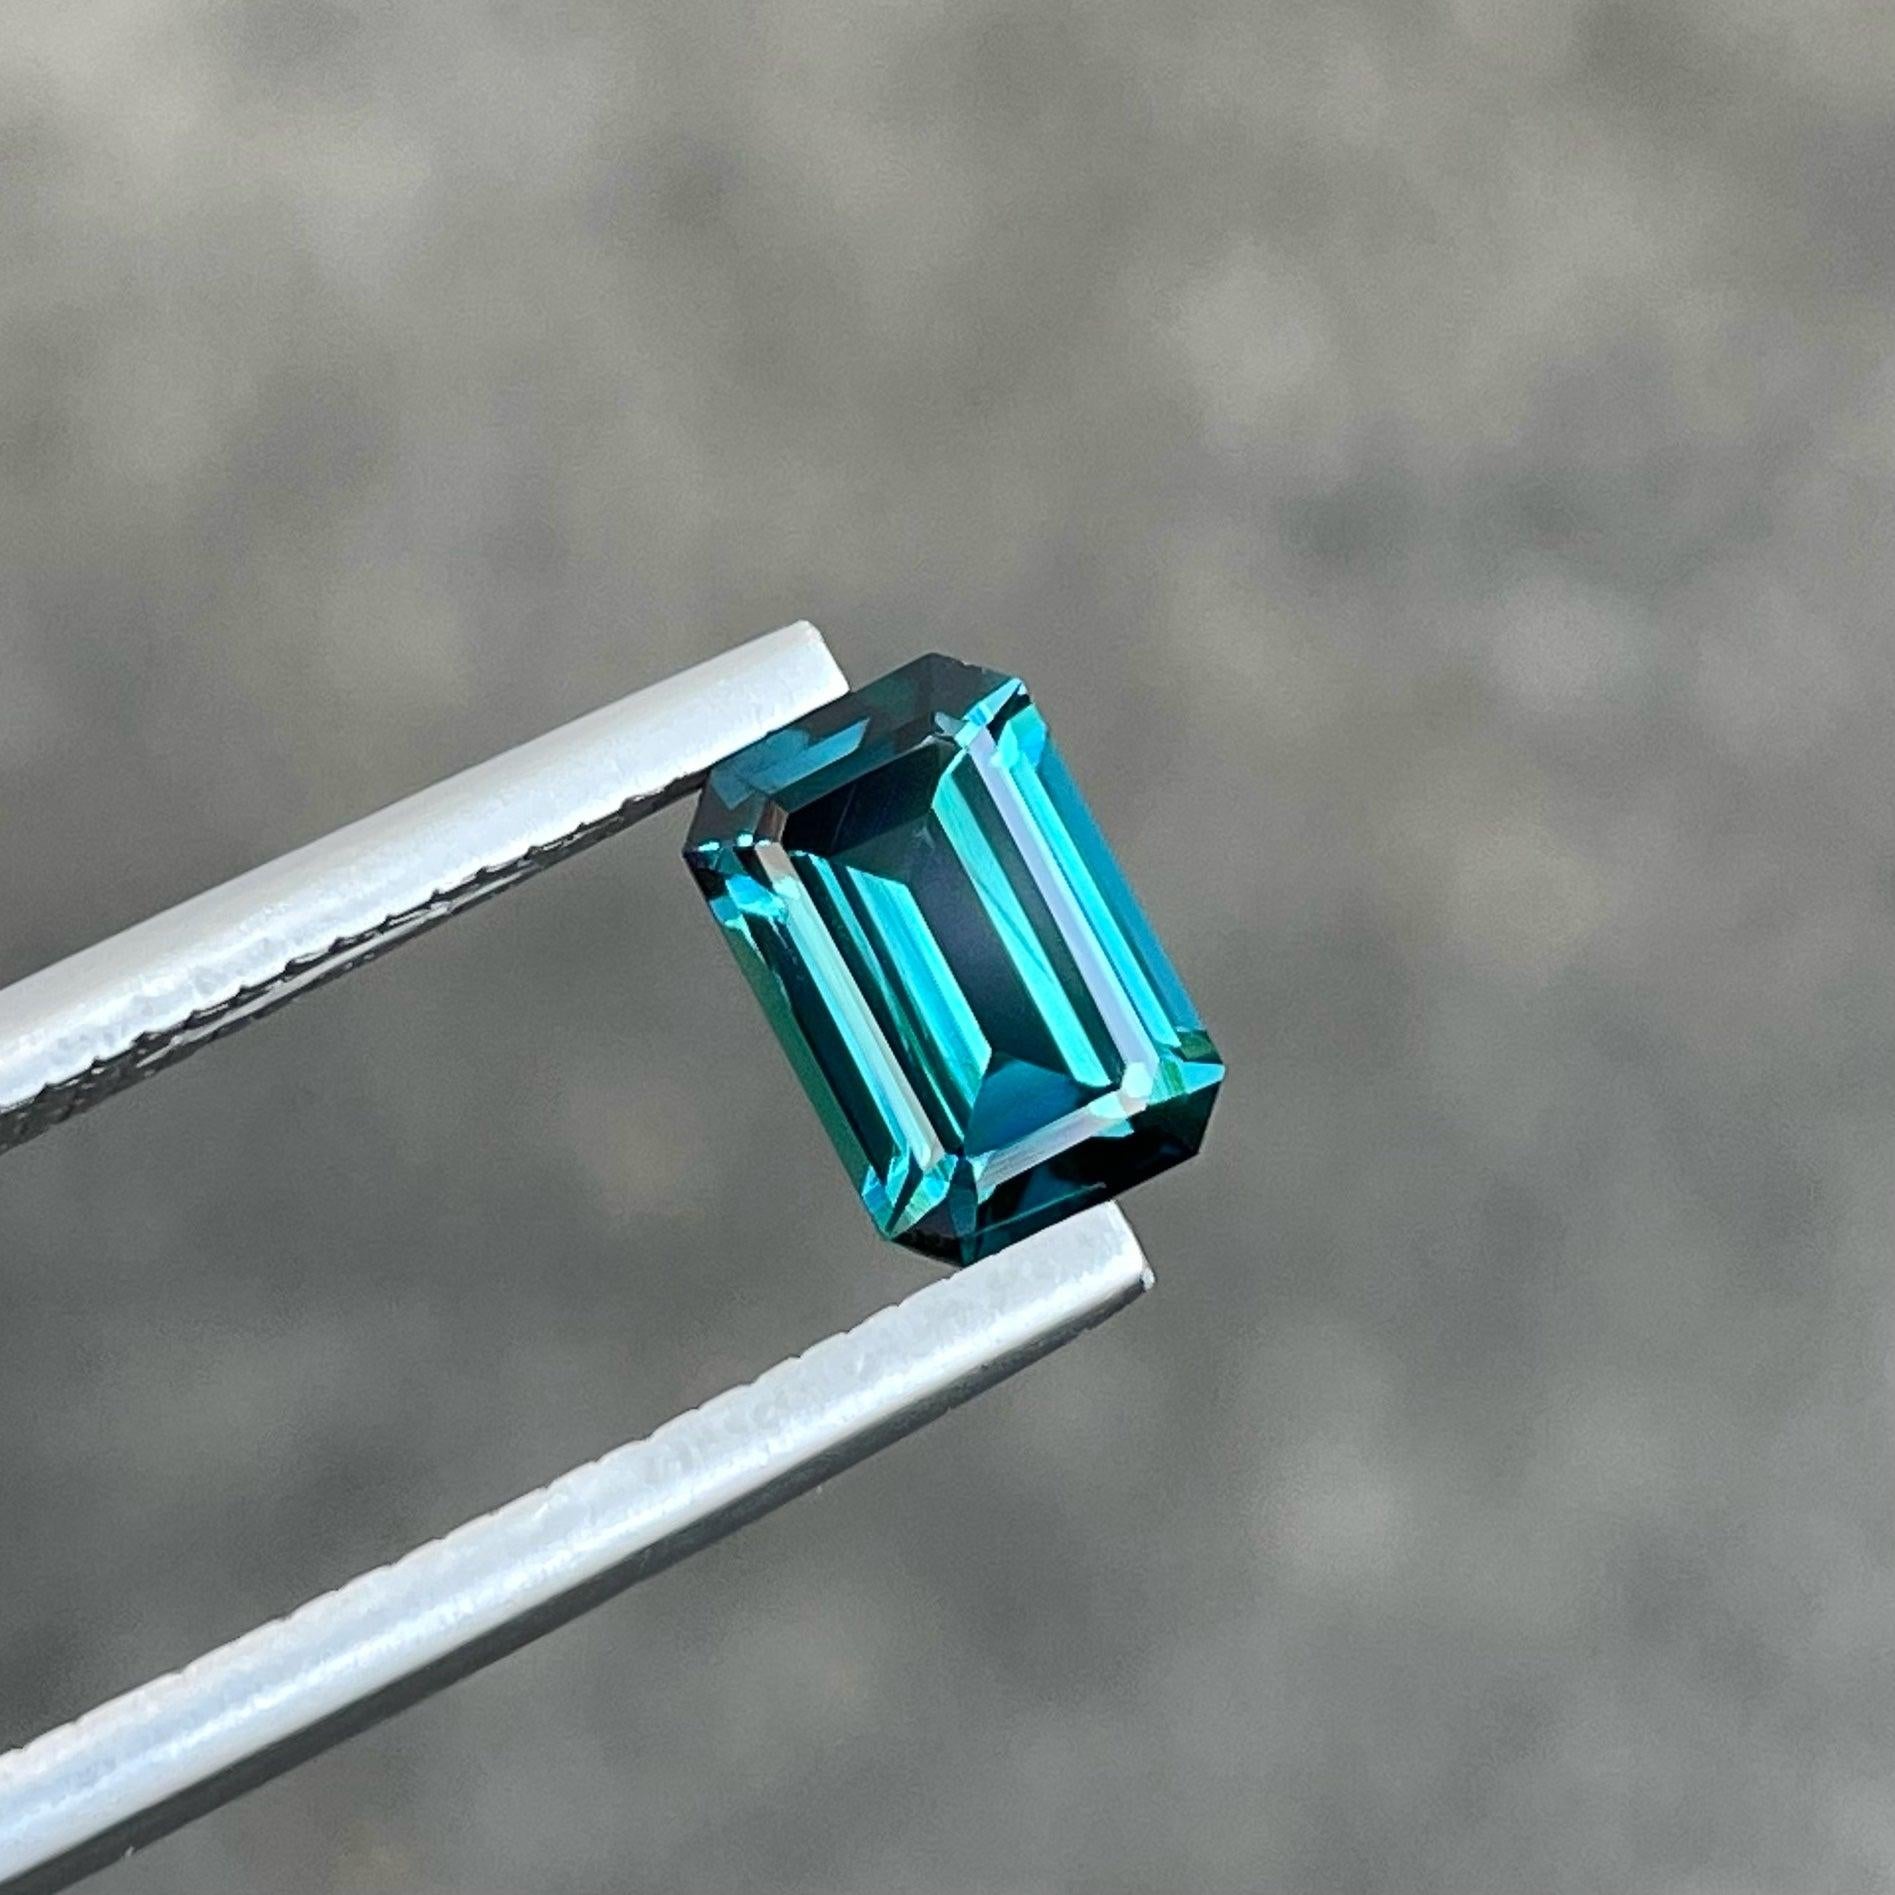 Exquisite Natural Blue Tourmaline Gemstone, available for sale at wholesale price, Loupe Clean Clarity, loose gemstone, Emerald Cut, 1.30 carats certified Tourmaline from Afghanistan.

Product Information:
GEMSTONE TYPE:	Exquisite Natural Blue